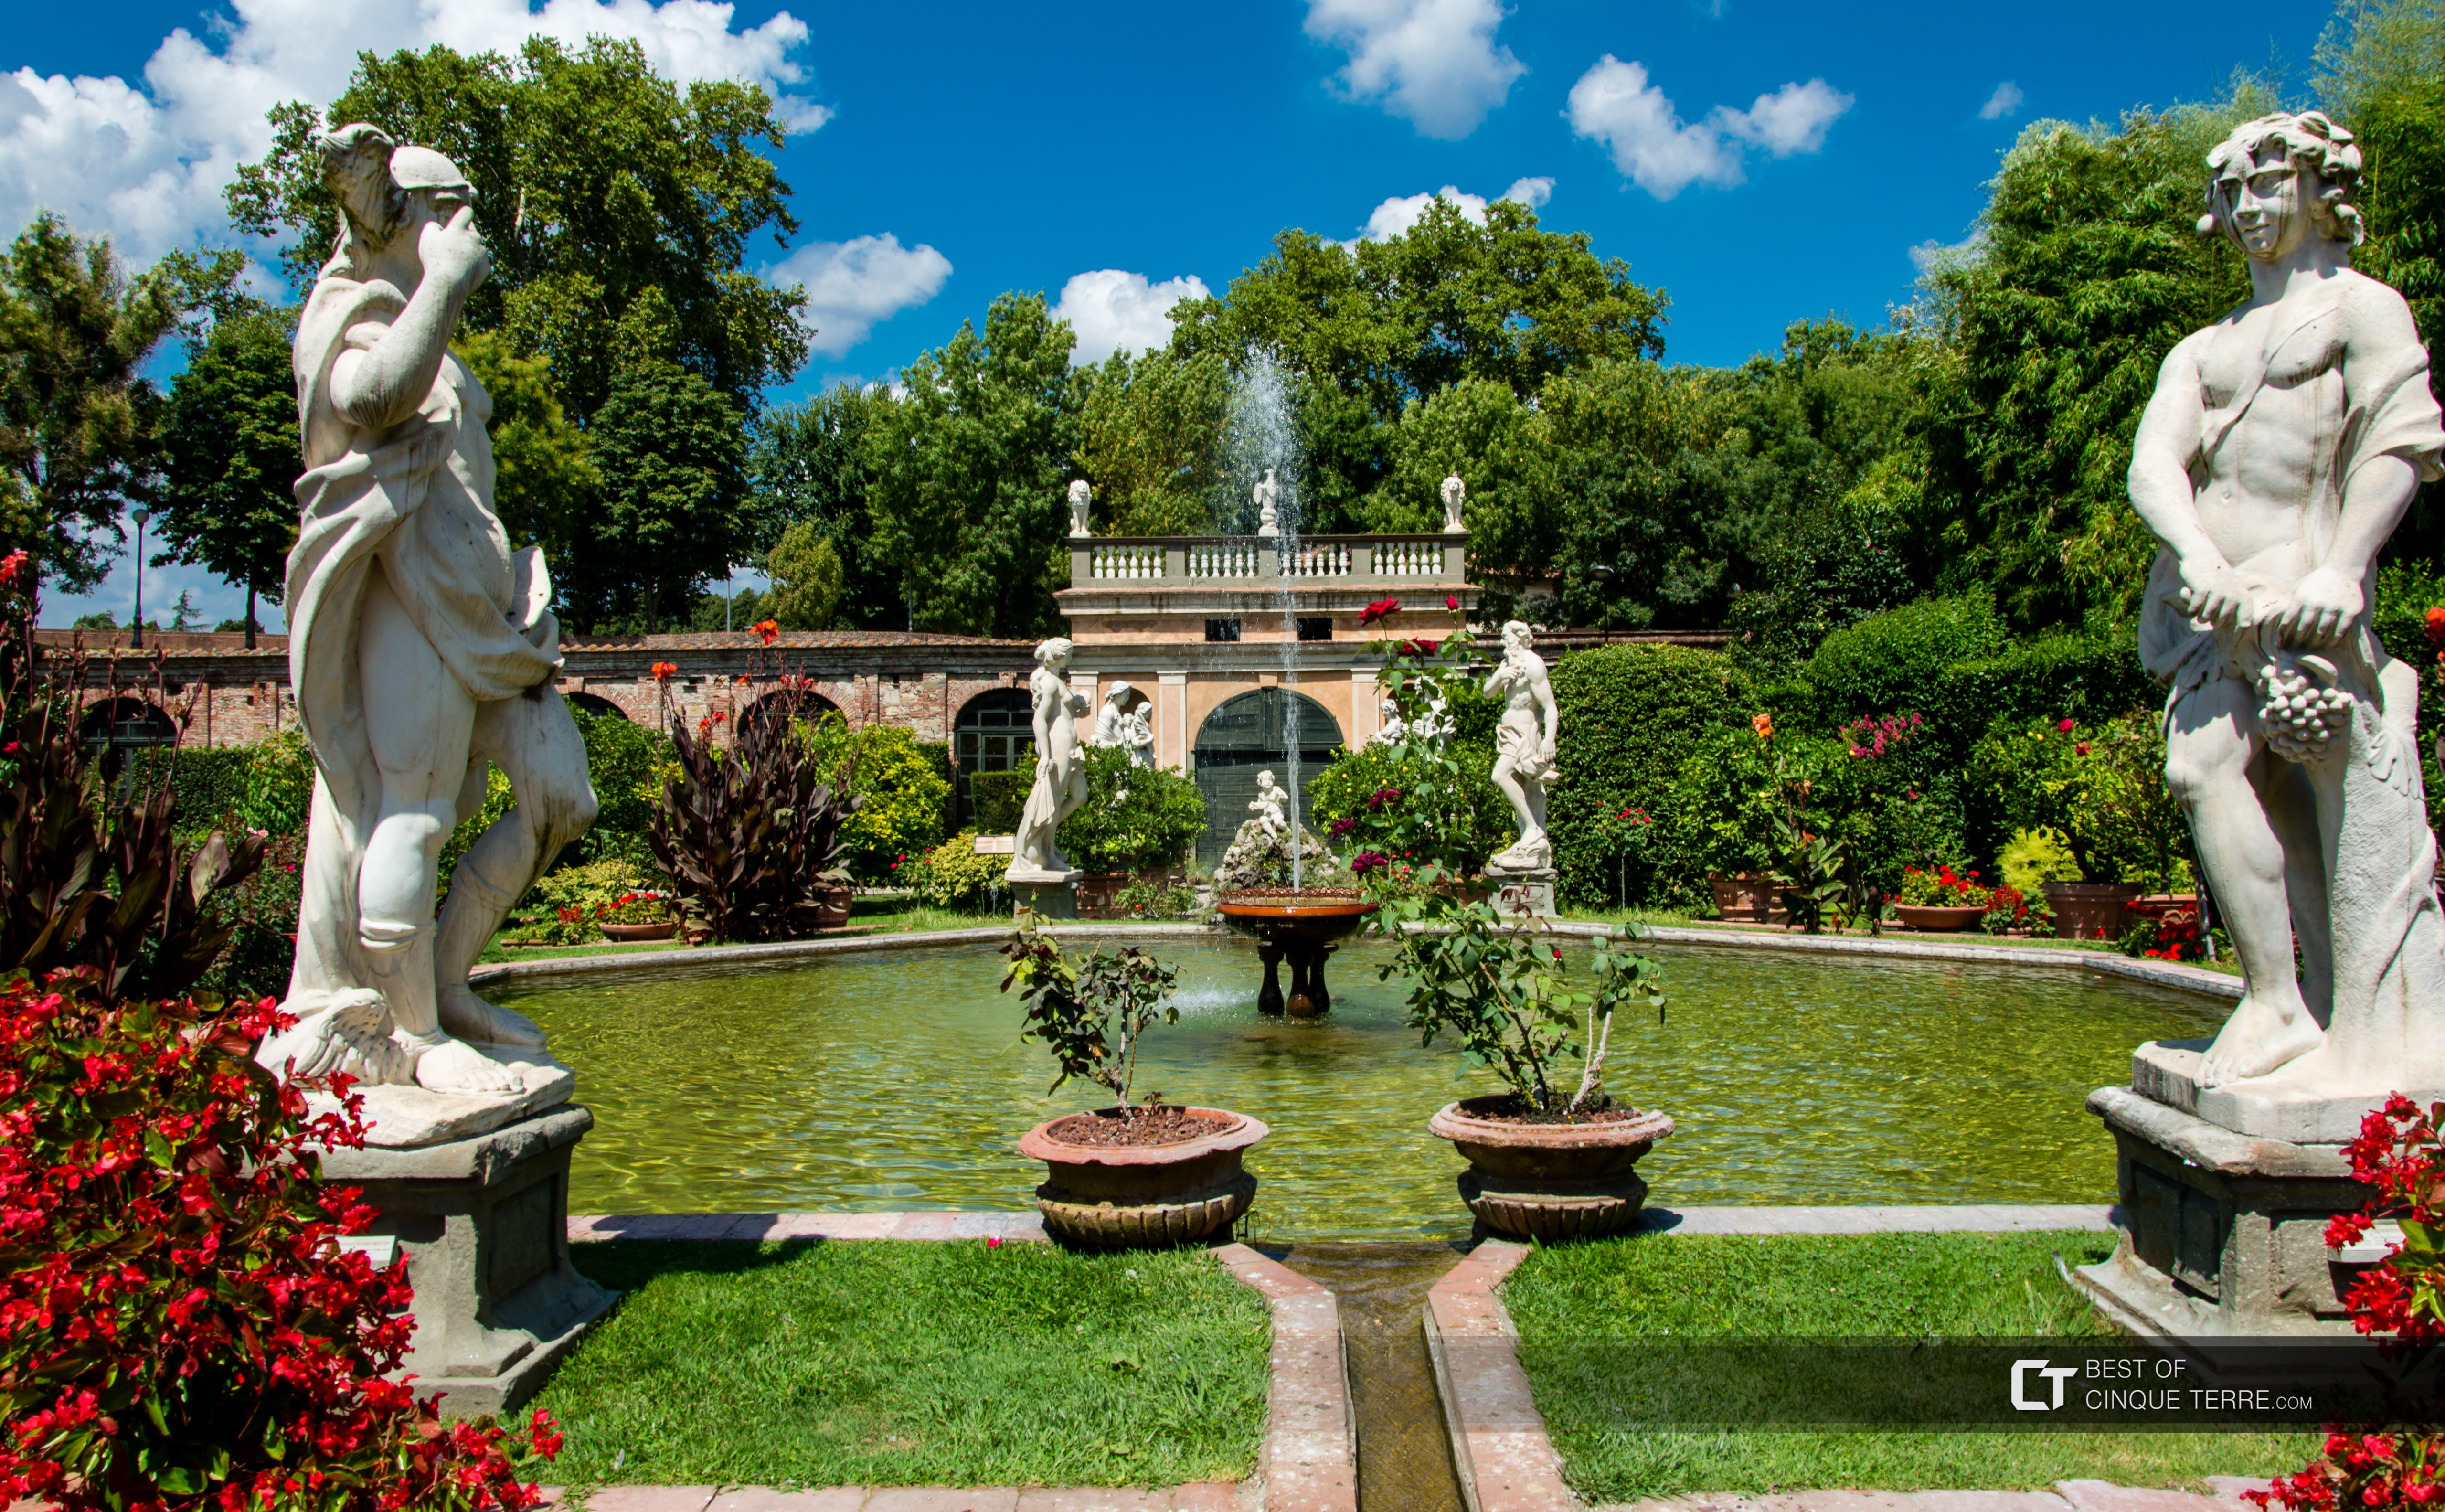 Garden of Palazzo Pfanner, Lucca, Italy